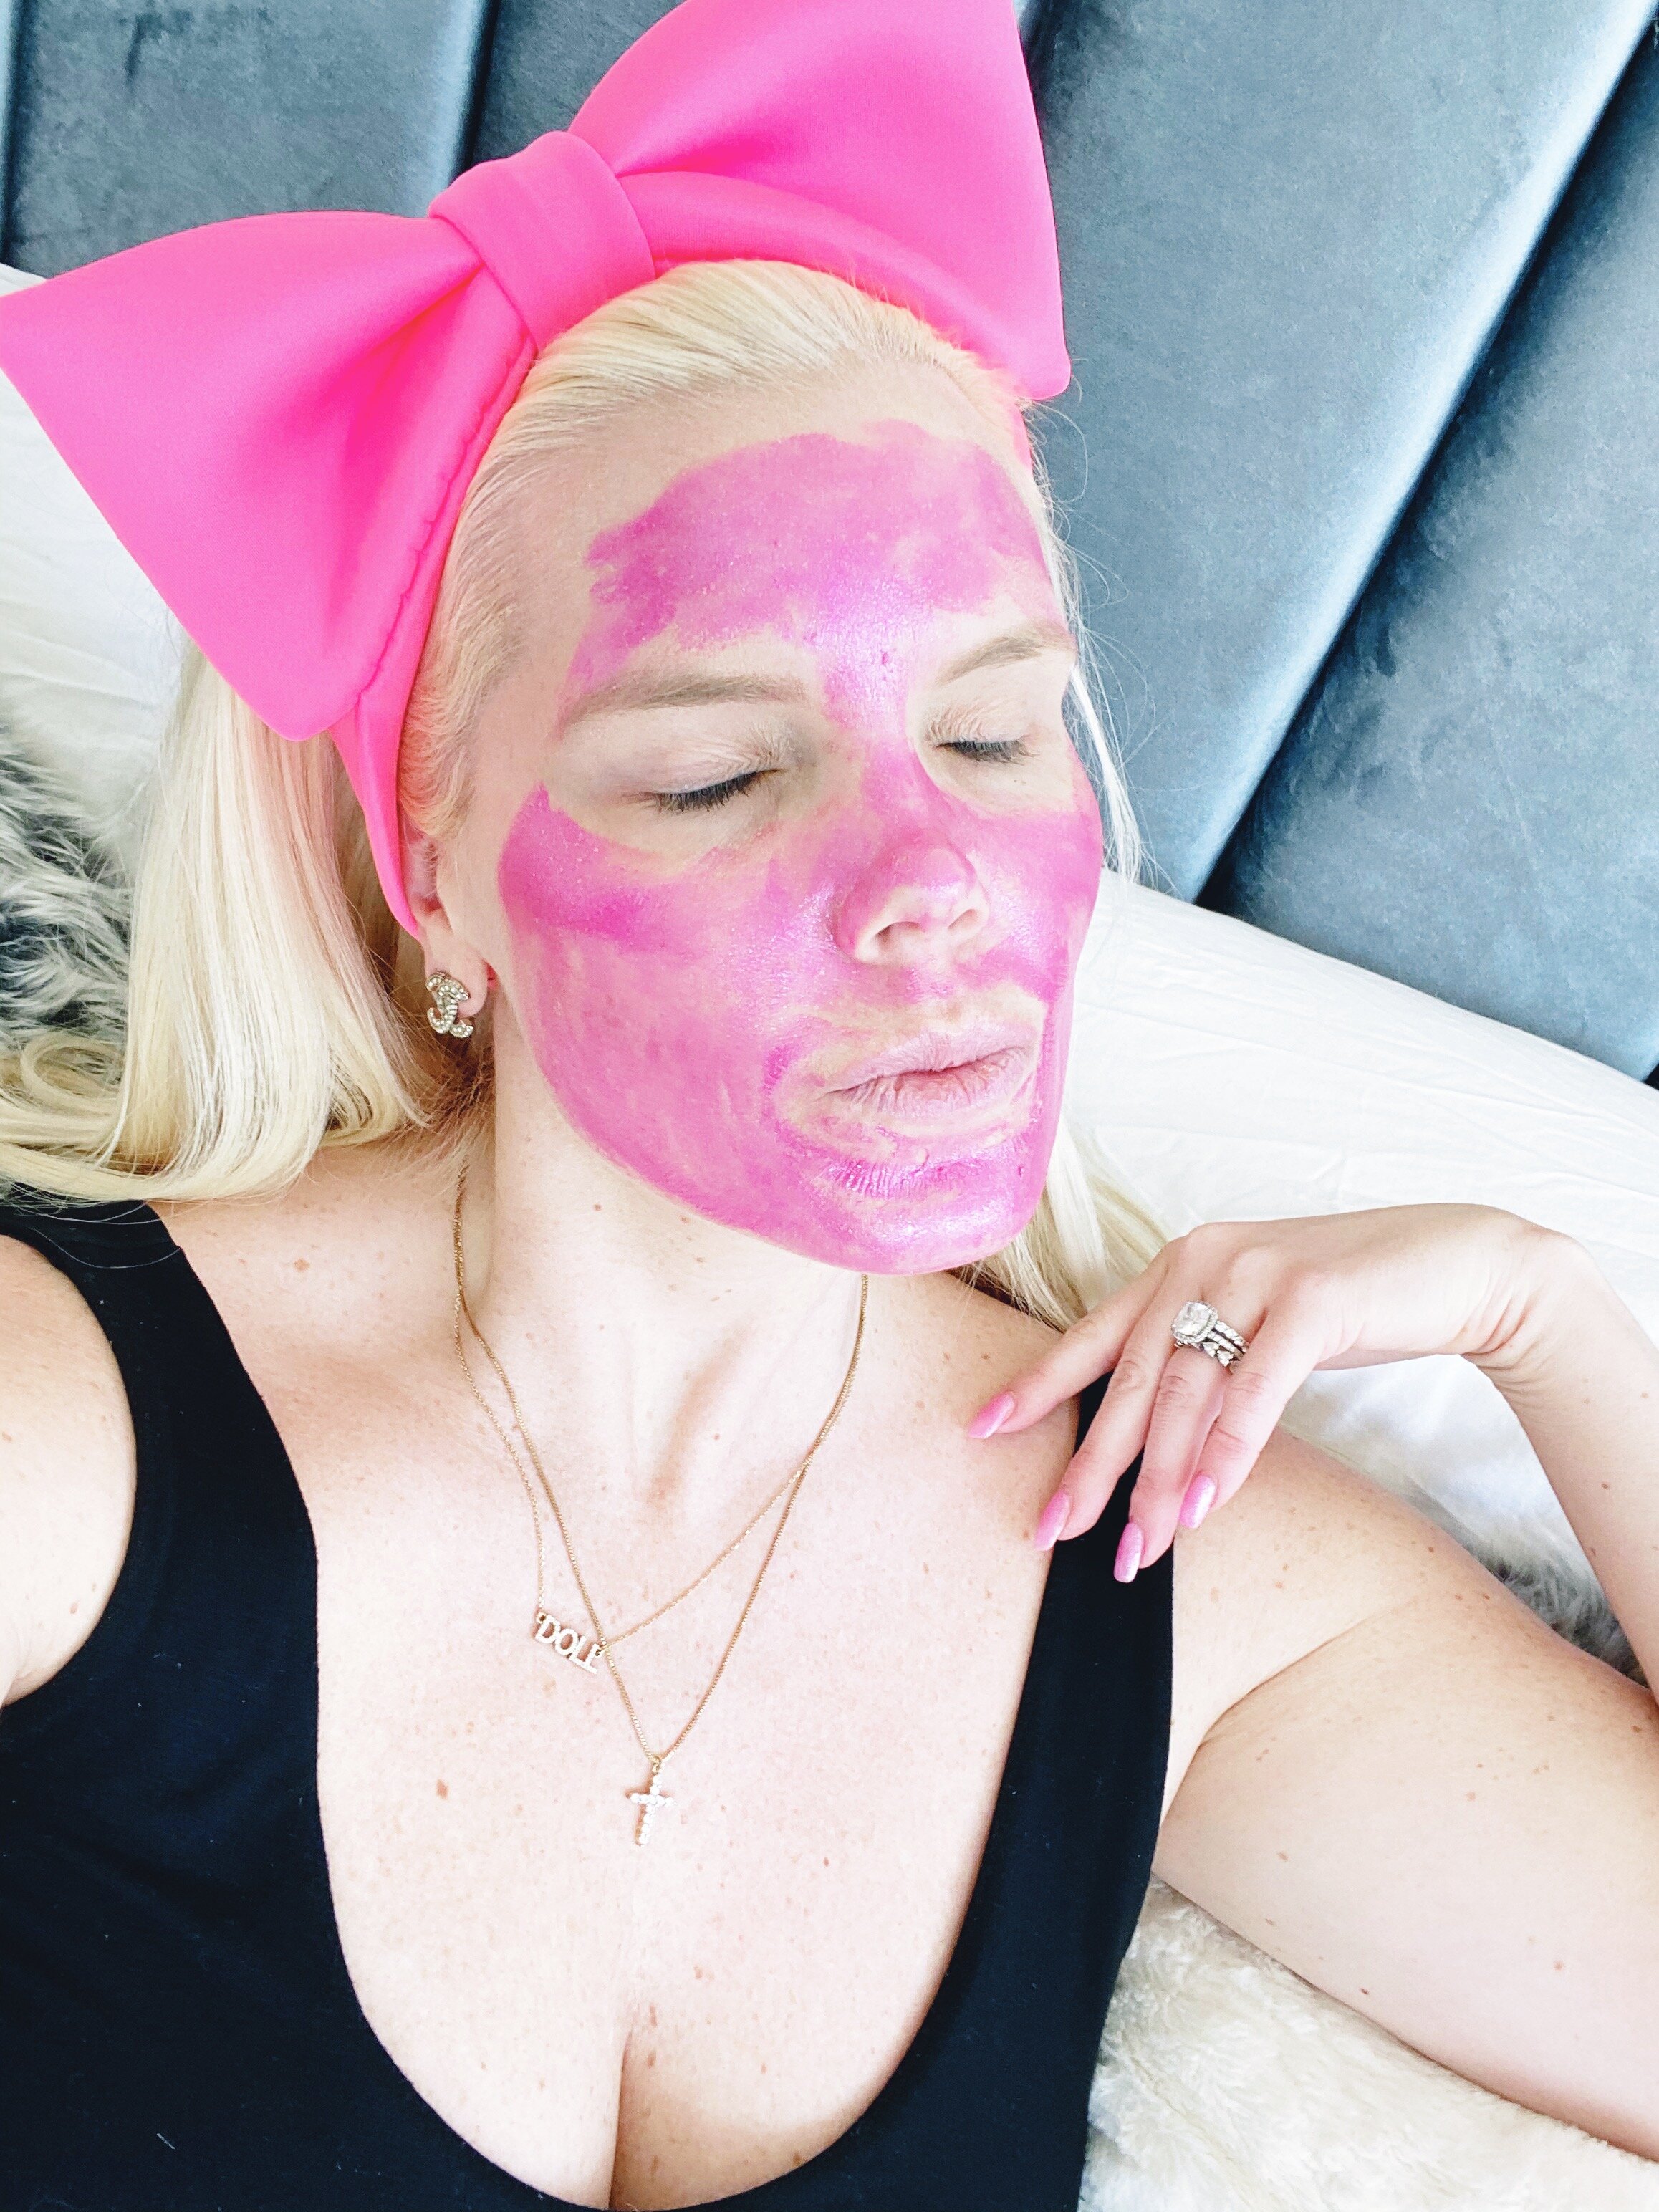 The-Caroline-Doll-Quarantine-Weekend-Stuck-At-Home-Pink-Blonde-Lifestyle-Influencer-Beauty-PUR-Cosmetics-Peel-Off-Mask-1.JPG